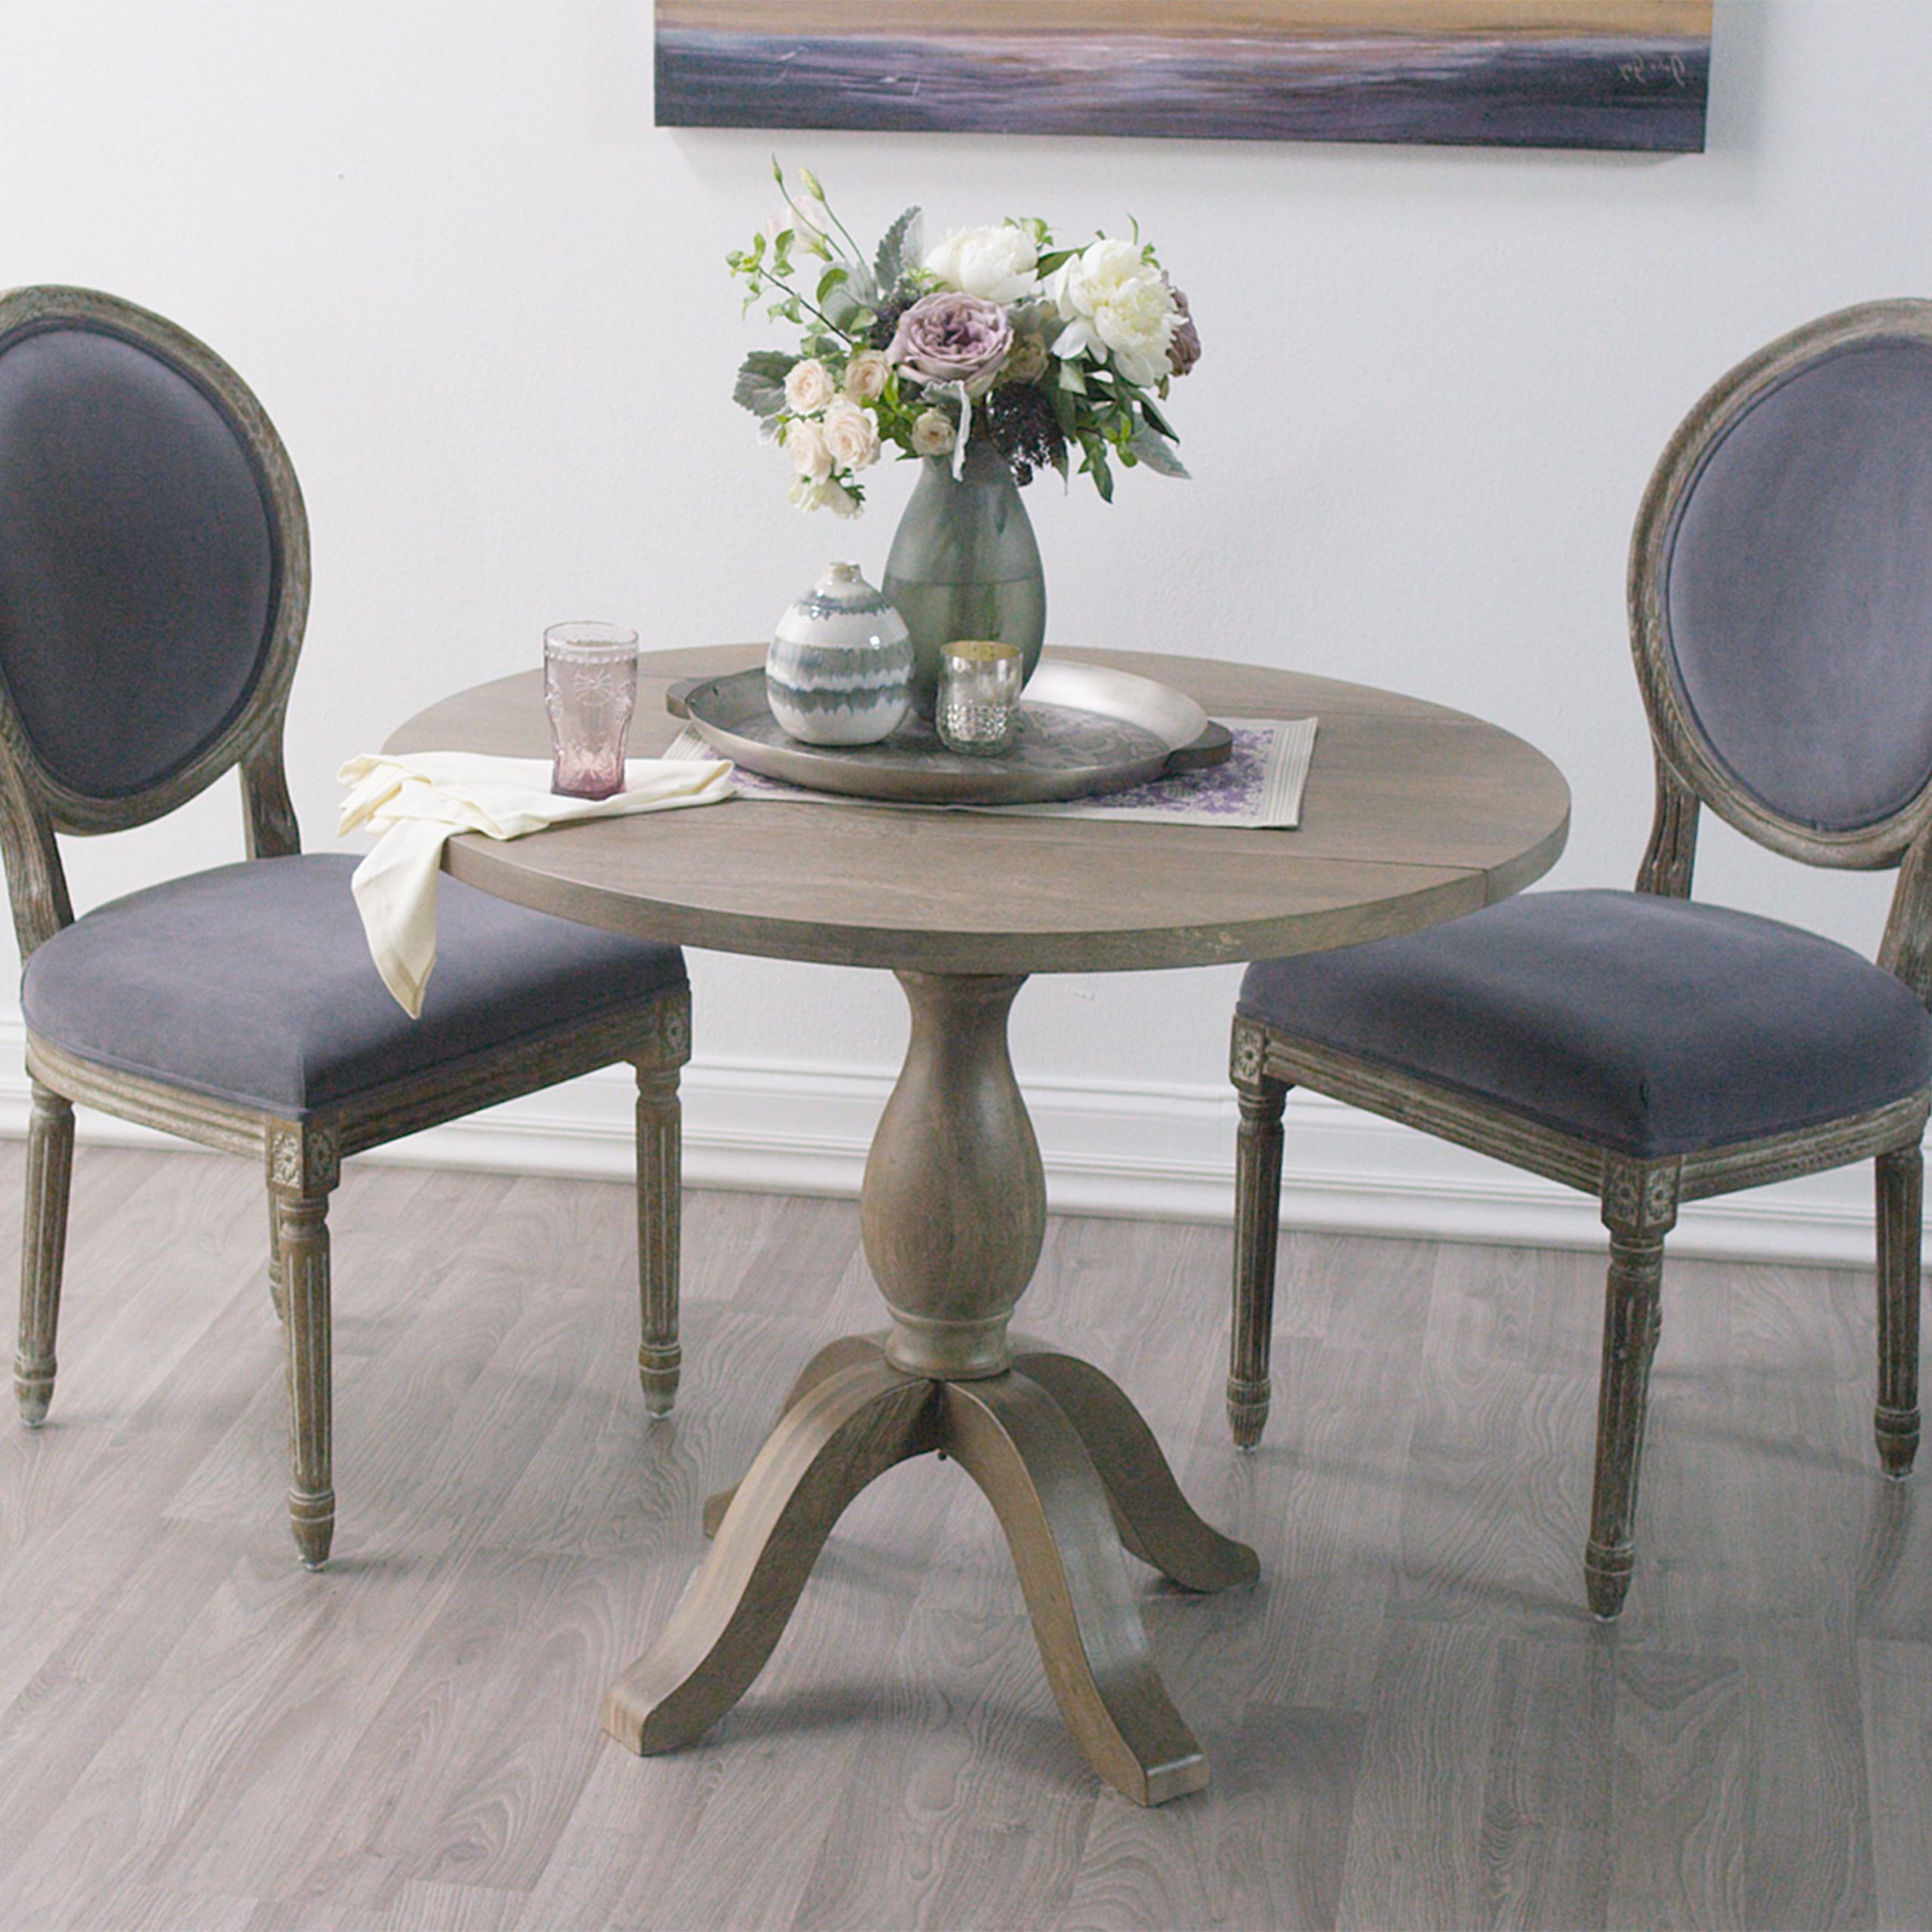 Leaf Round Console Tables With 2019 Our Round Drop Leaf Table Is A Versatile, Space Saving (View 7 of 10)